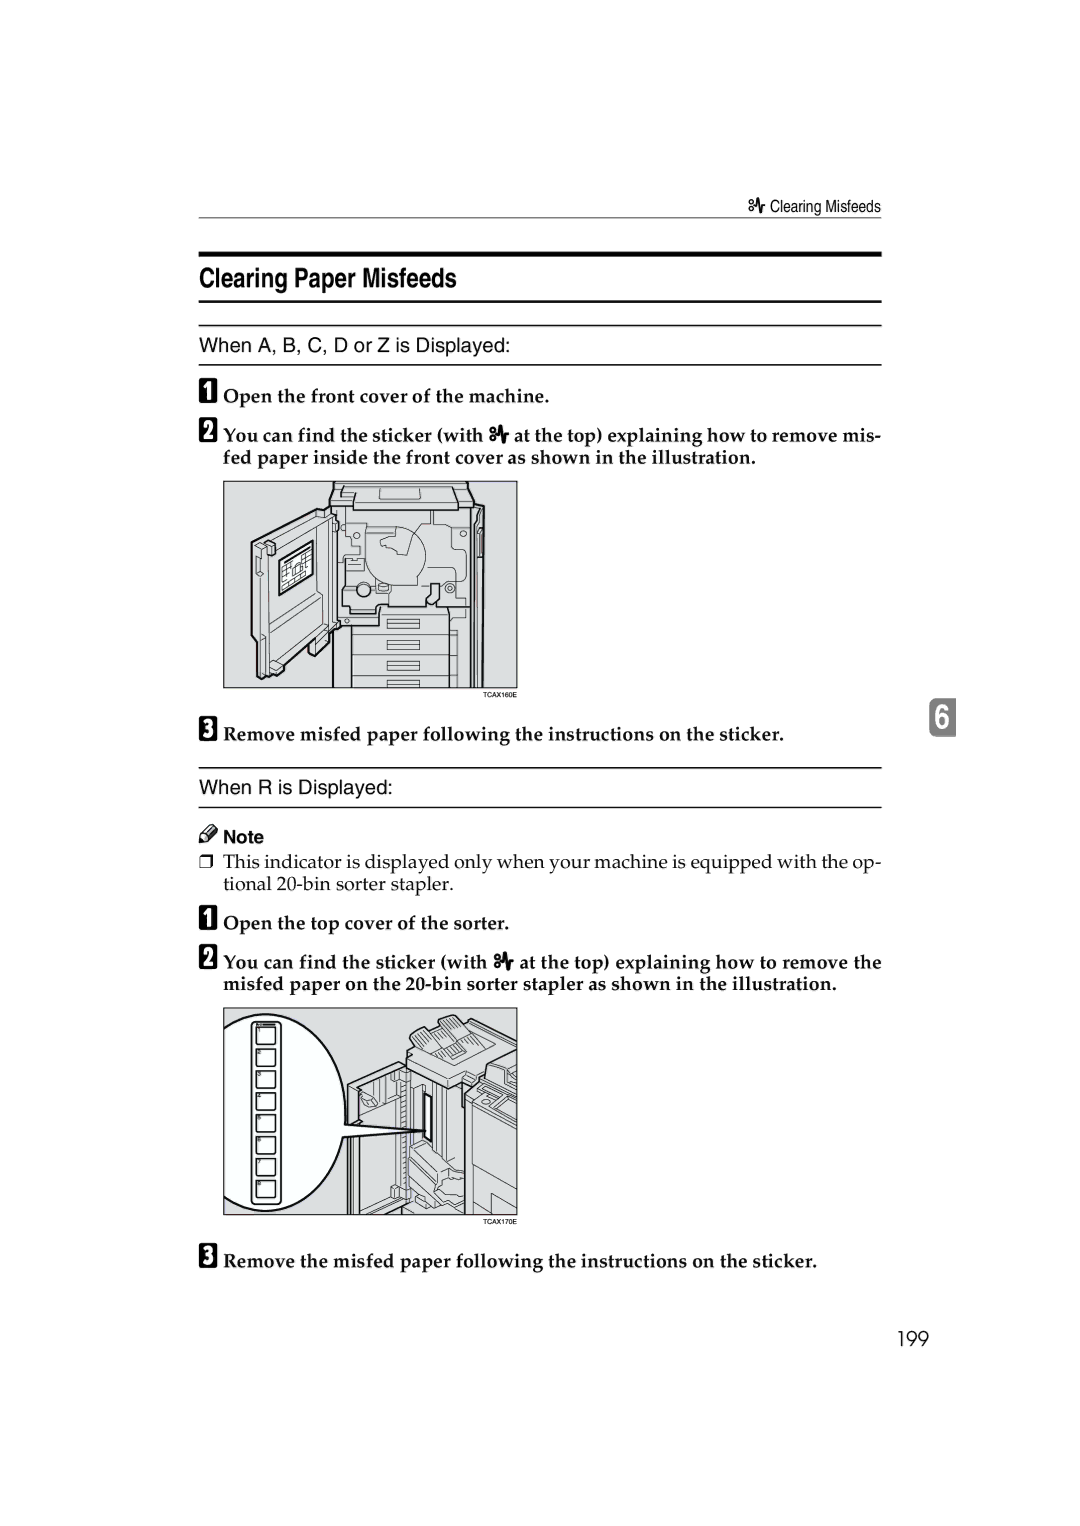 Ricoh 6513 manual Clearing Paper Misfeeds, 199 